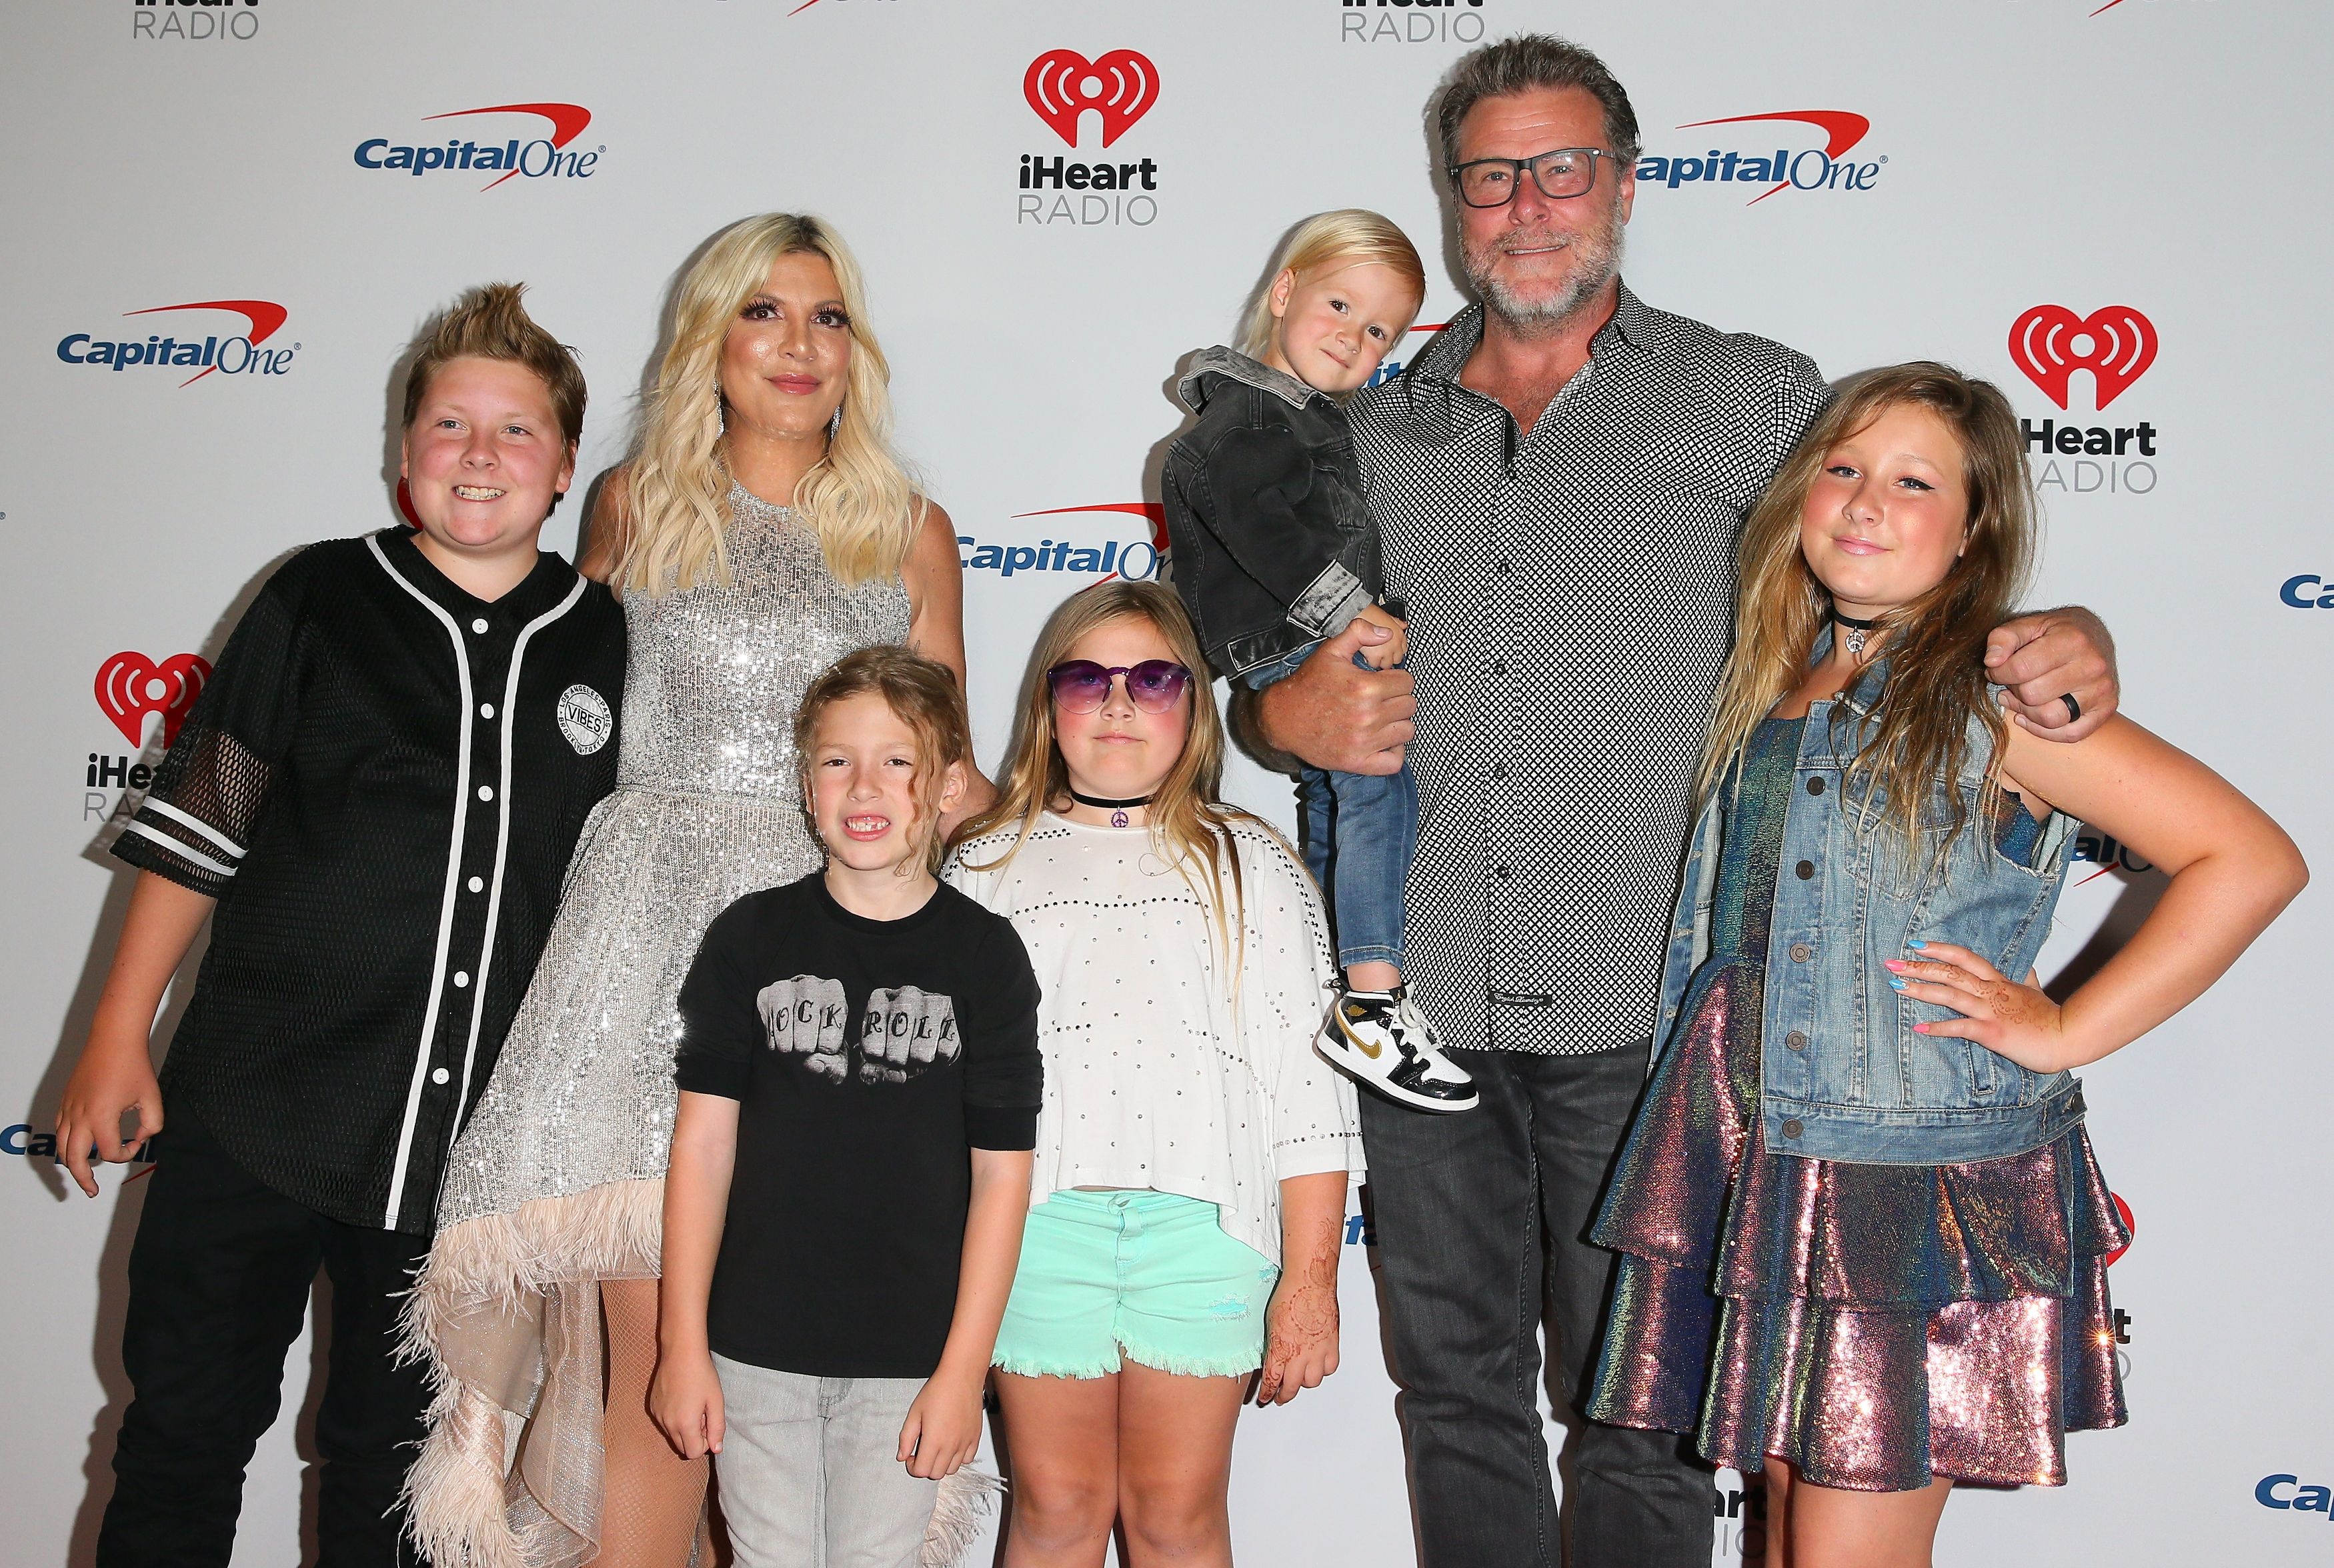 Tori Spelling and Dean McDermott with their kids, Stella Doreen, Hattie Margaret, Liam Aaron, Finn Davey, and Beau Dean McDermott during the 2019 iHeartRadio Music Festival in Las Vegas, Nevada on September 20, 2019 | Source: Getty Images